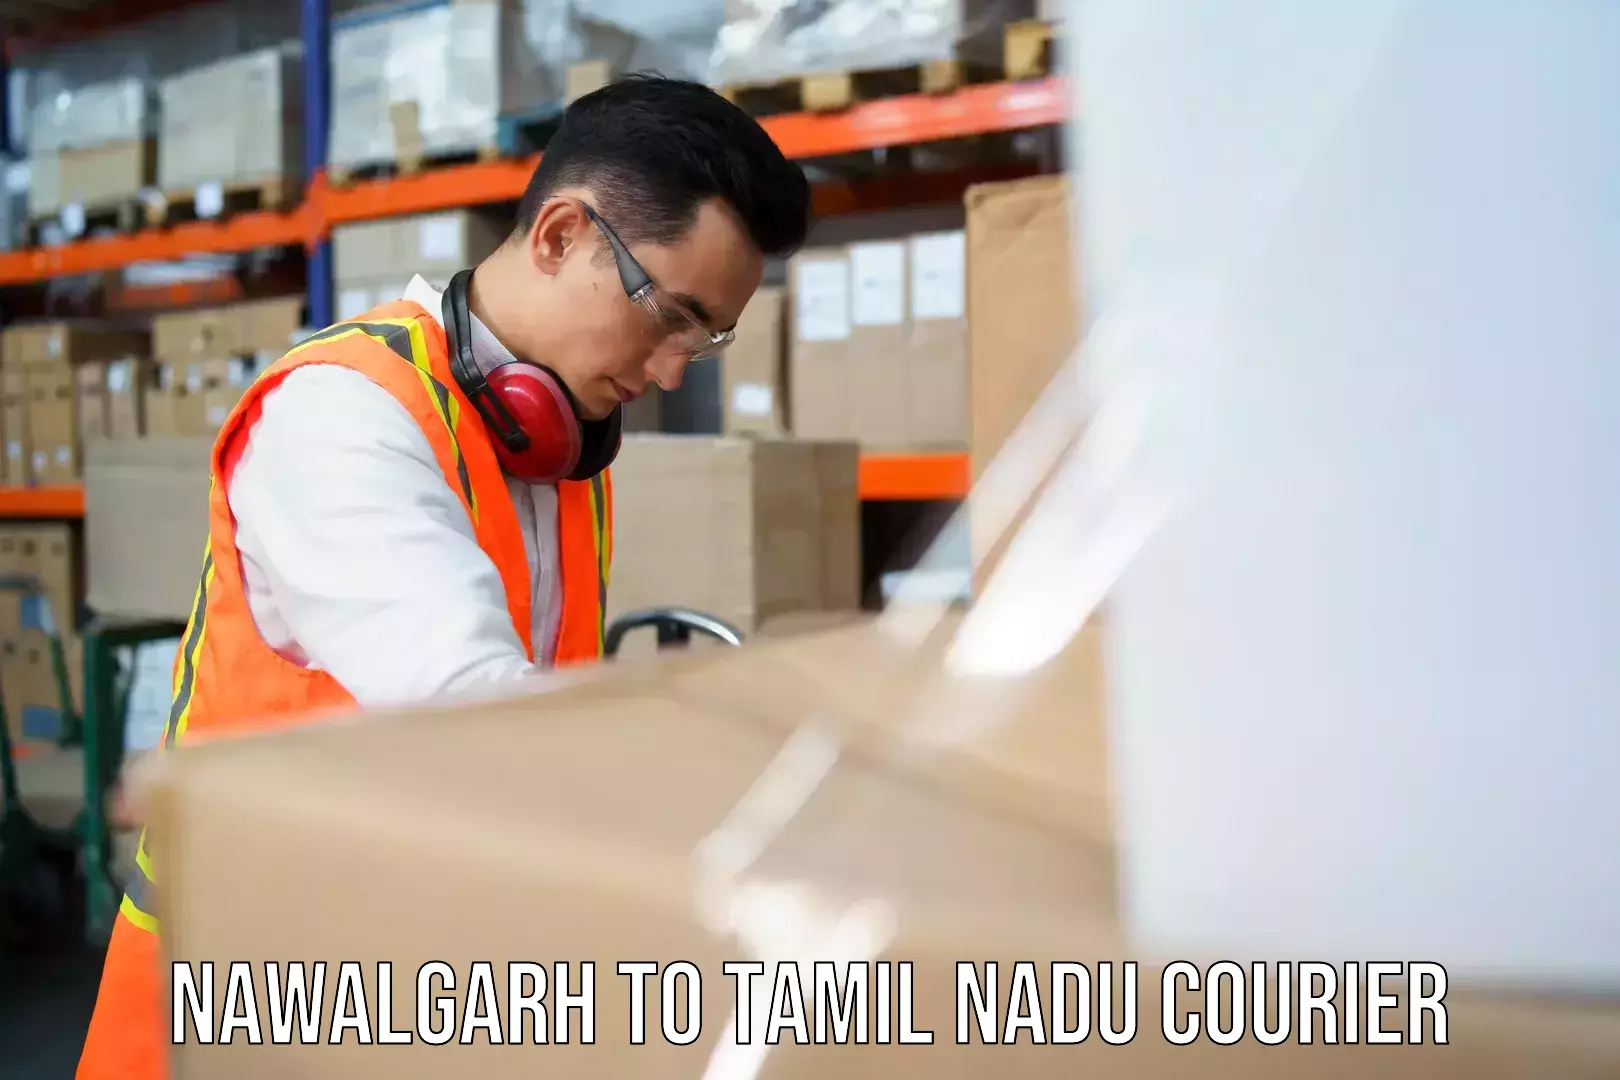 Reliable delivery network Nawalgarh to Tamil Nadu